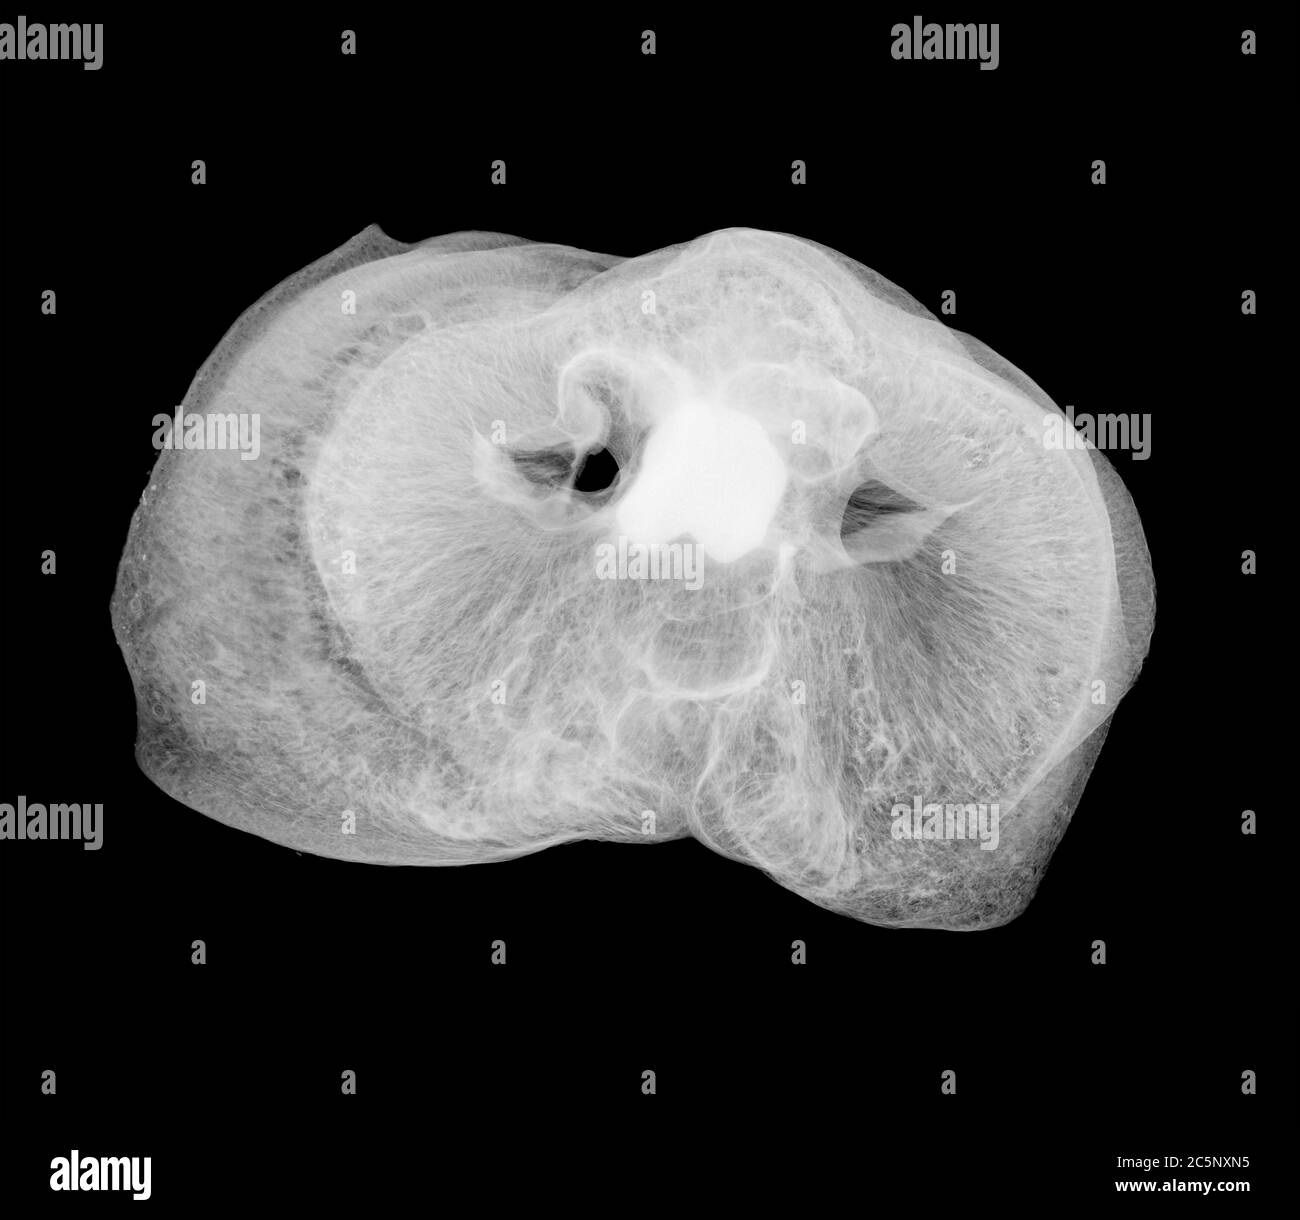 Pig's snout, X-ray Stock Photo